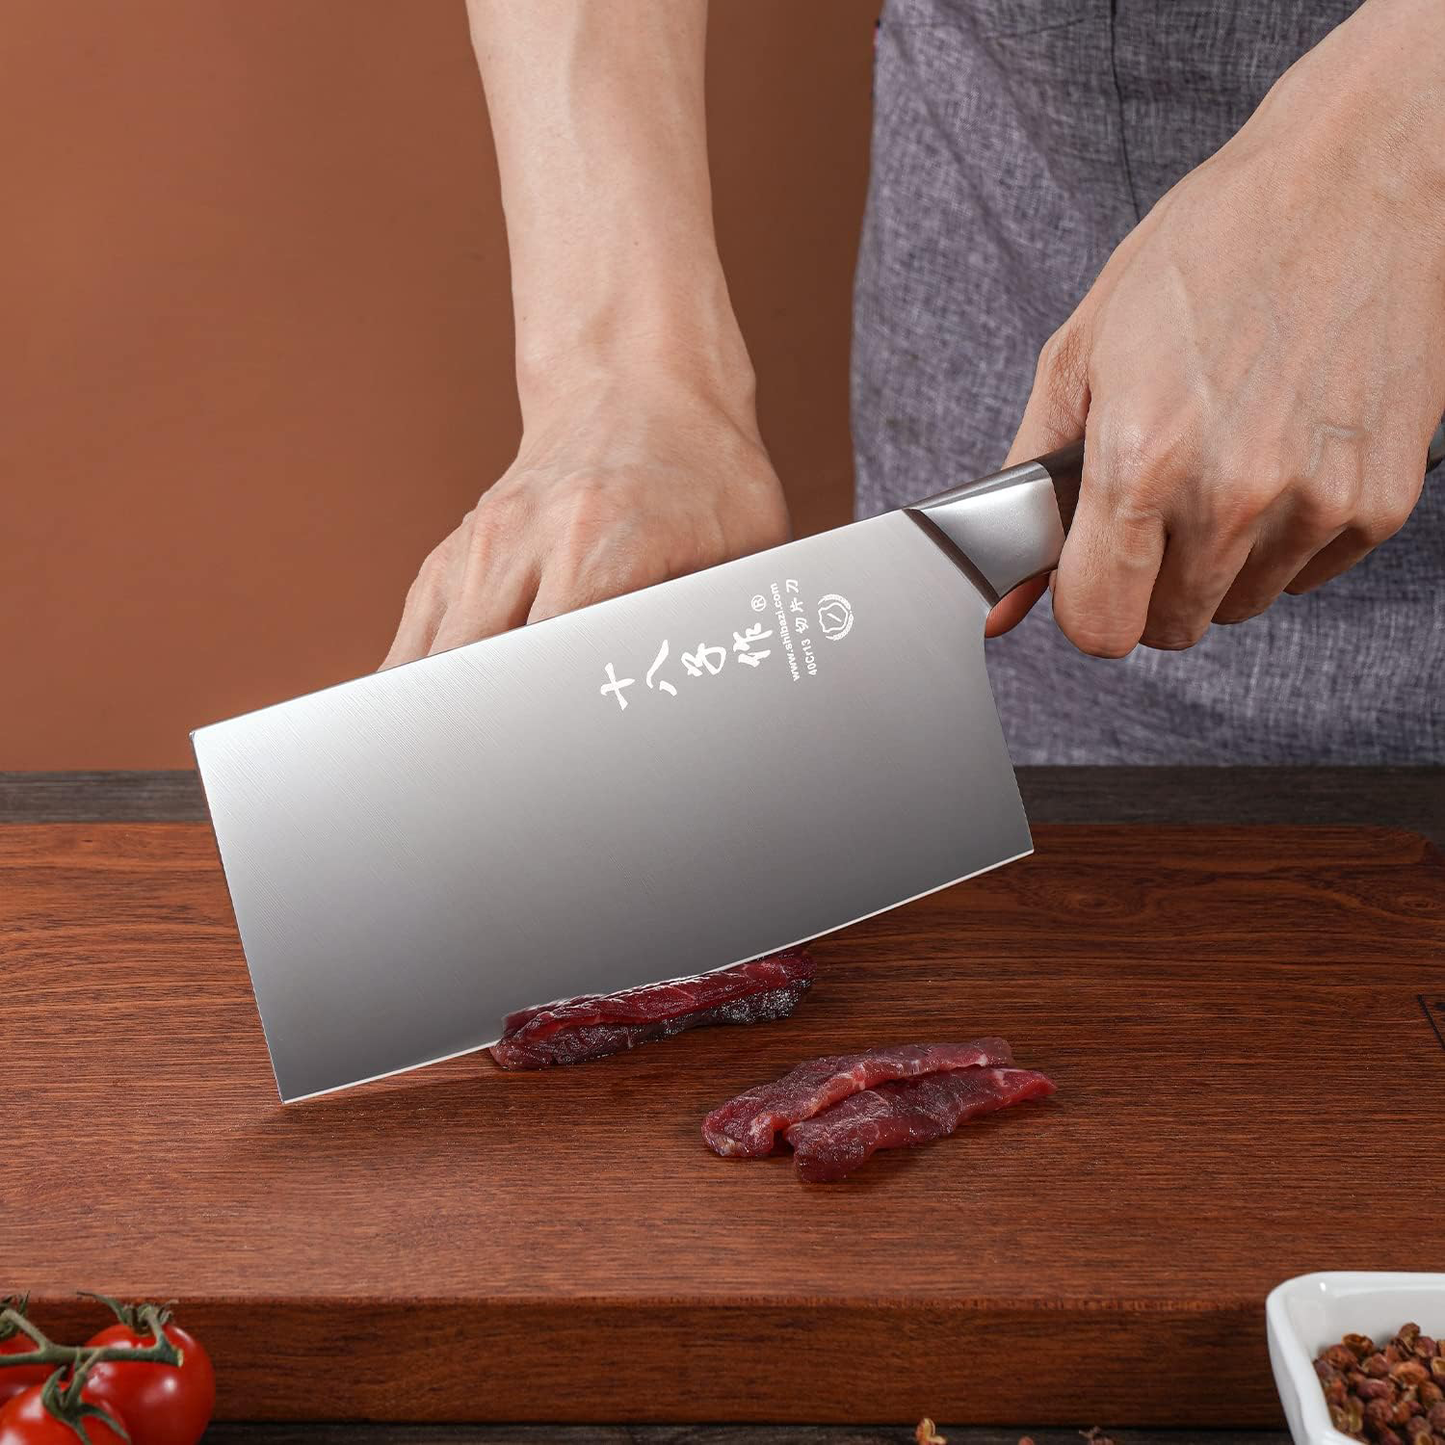 KD Professional 7-Inch Meat Cleaver: Super Sharp Stainless Steel Blade